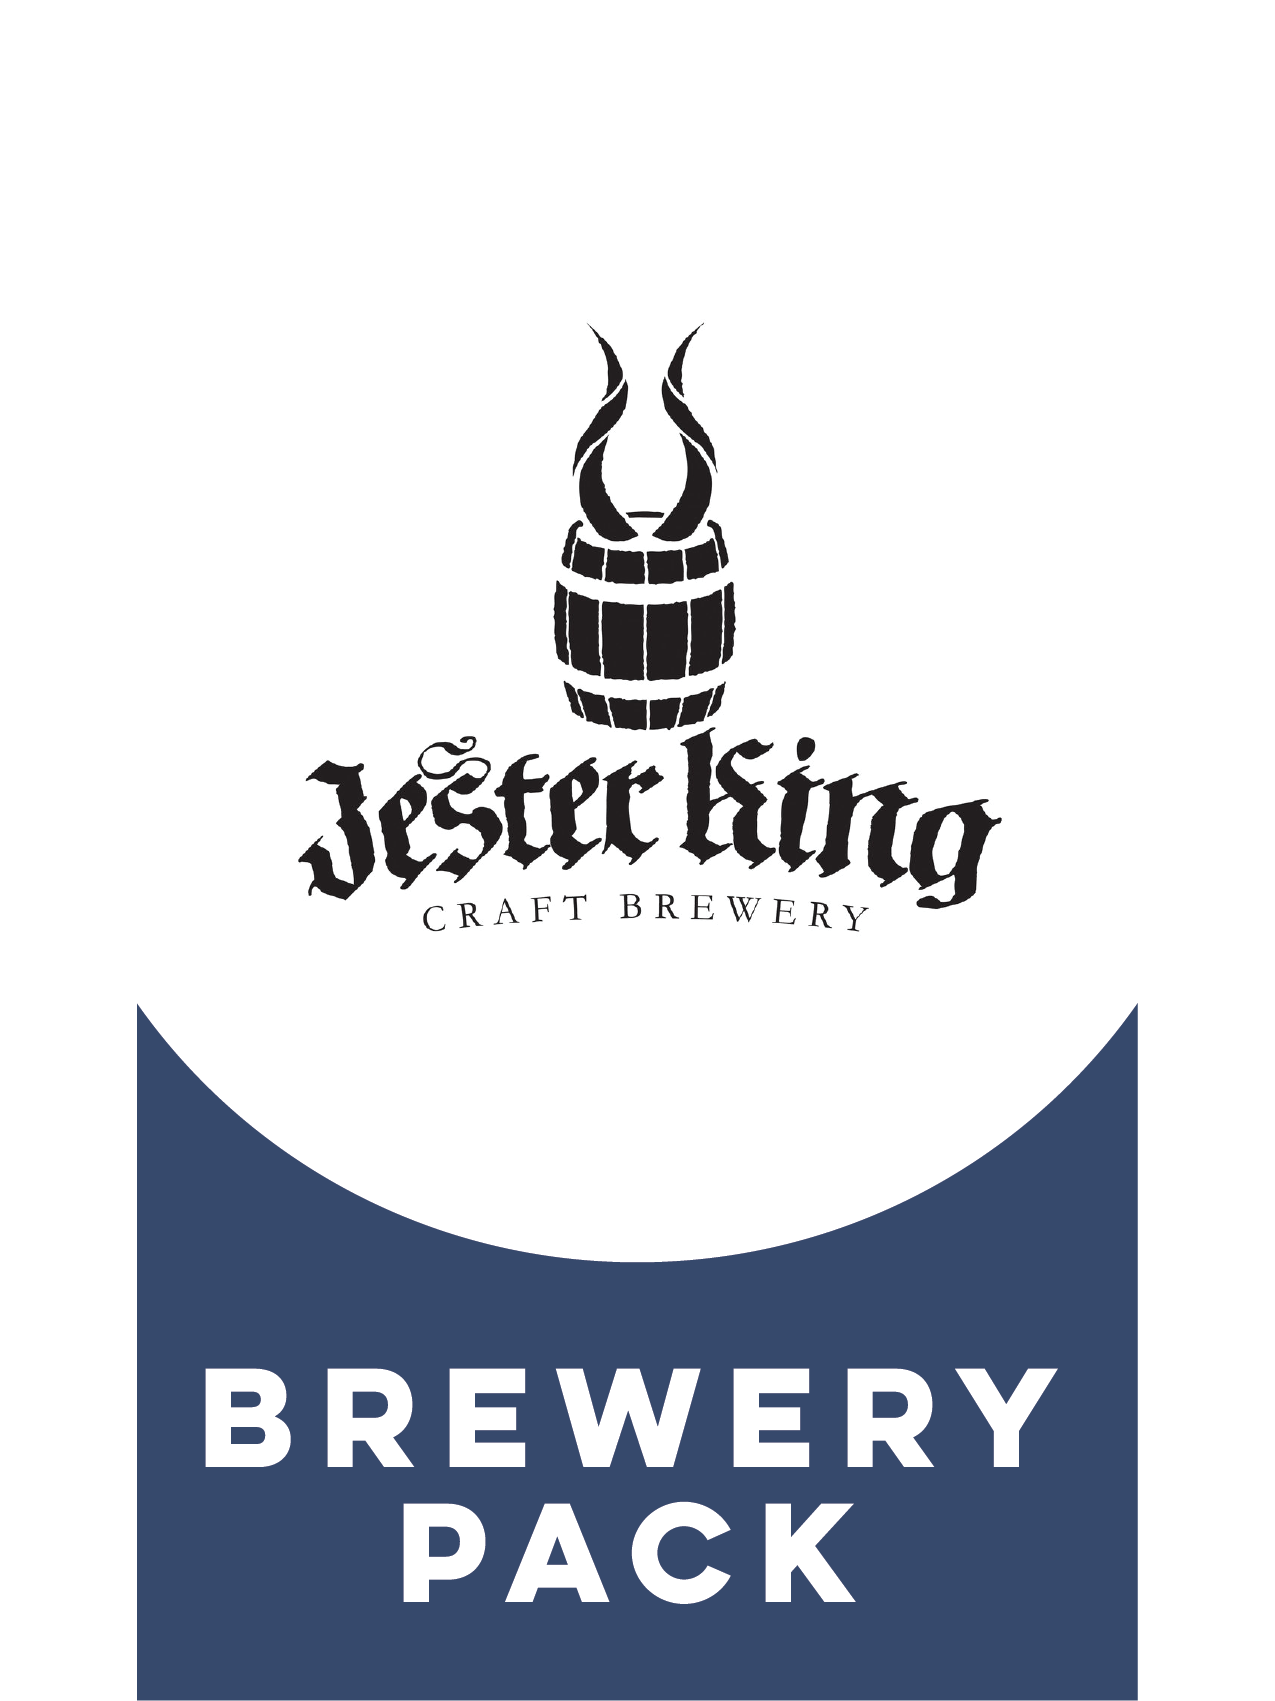 -Jester King- Jester King Brewery Pack-Packs & Cases- Only @ Beer Republic - The best online beer store for American & Canadian craft beer - Buy beer online from the USA and Canada - Bier online kopen - Amerikaans bier kopen - Craft beer store - Craft beer kopen - Amerikanisch bier kaufen - Bier online kaufen - Acheter biere online - IPA - Stout - Porter - New England IPA - Hazy IPA - Imperial Stout - Barrel Aged - Barrel Aged Imperial Stout - Brown - Dark beer - Blond - Blonde - Pilsner - Lager - Wheat - W